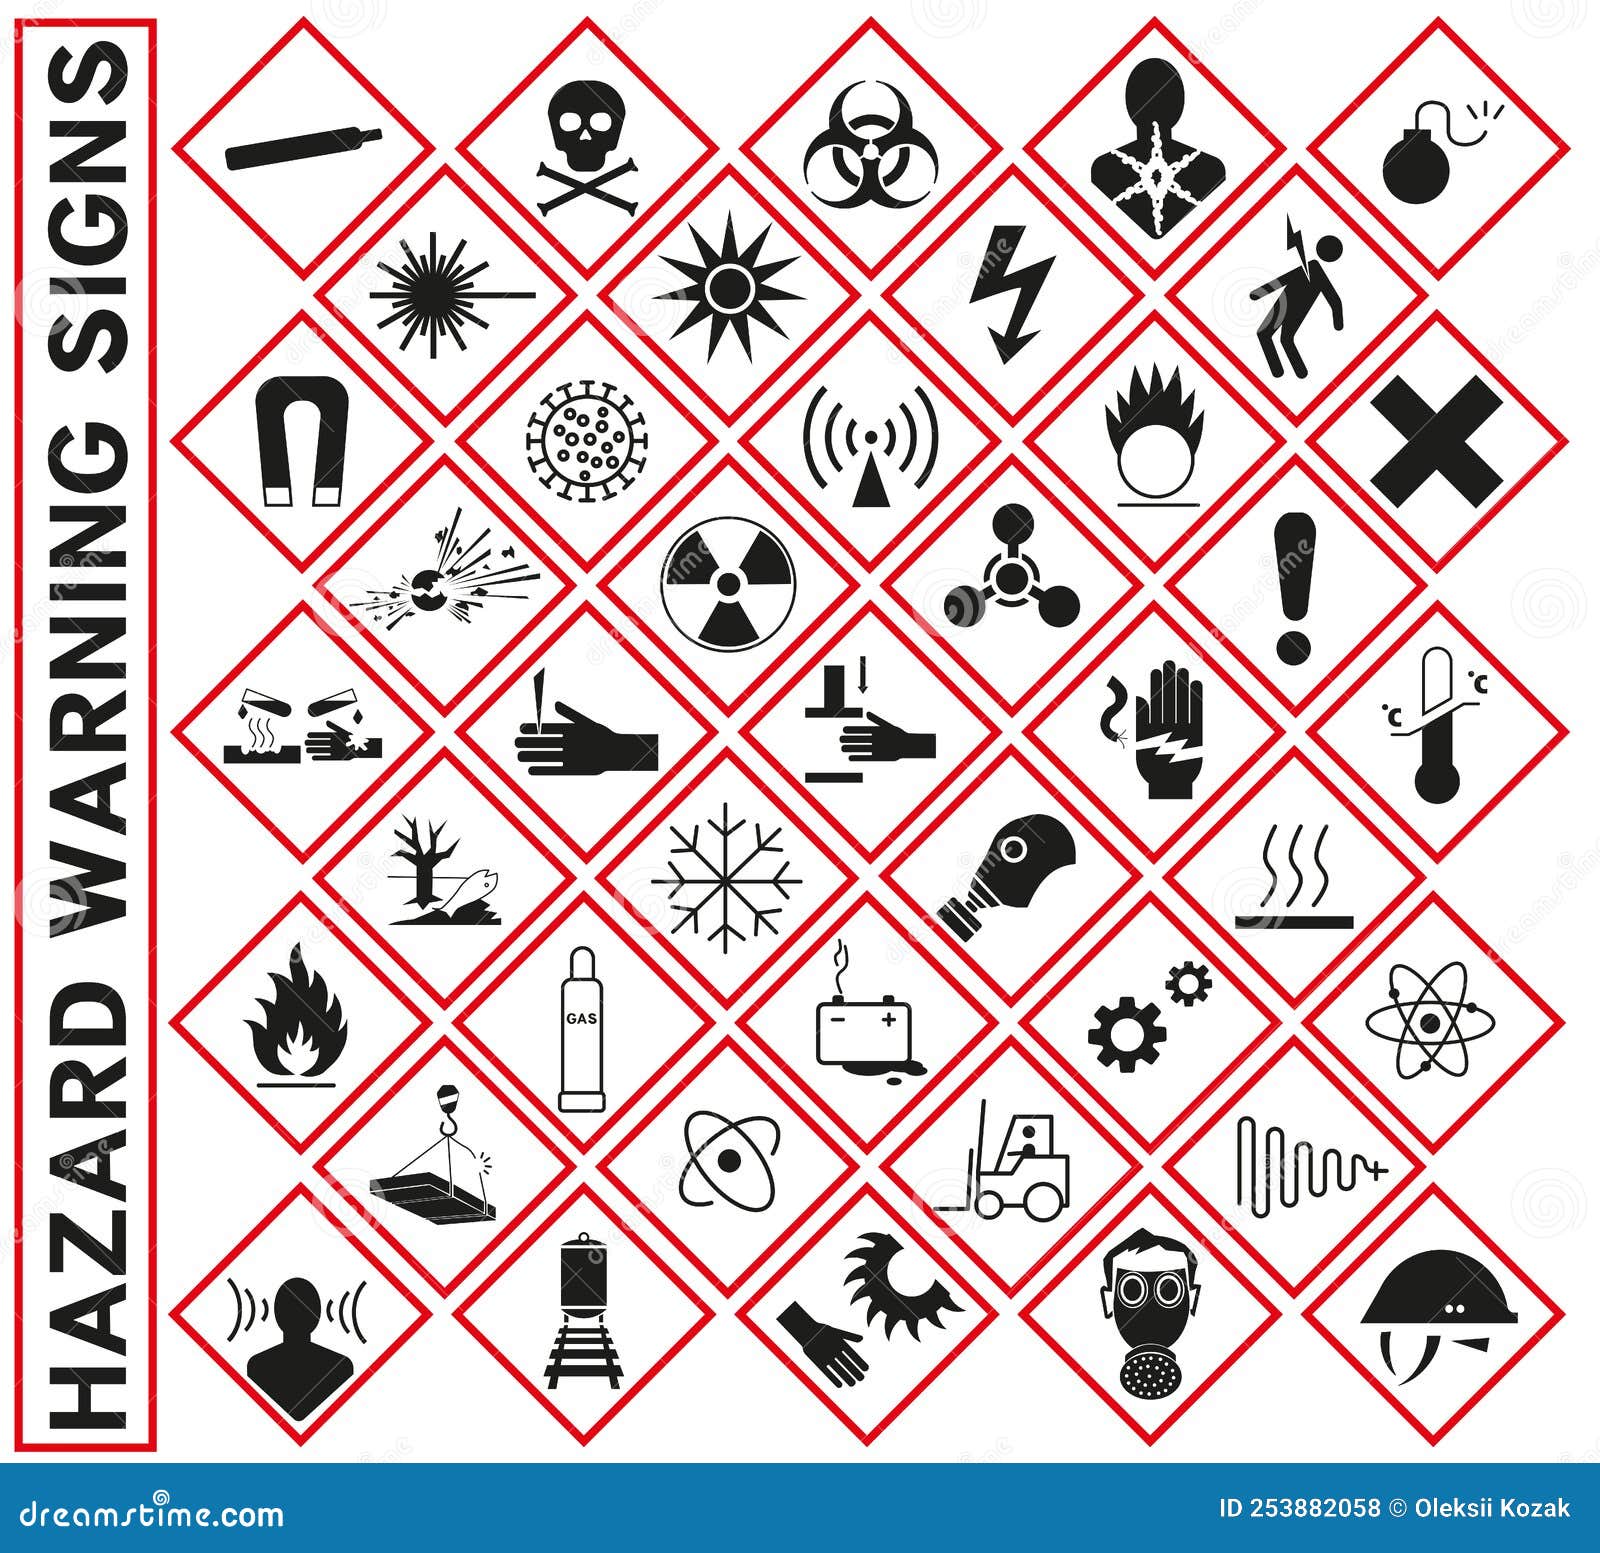 hazard warning  icons ghs safety pictograms. sign of physical hazards